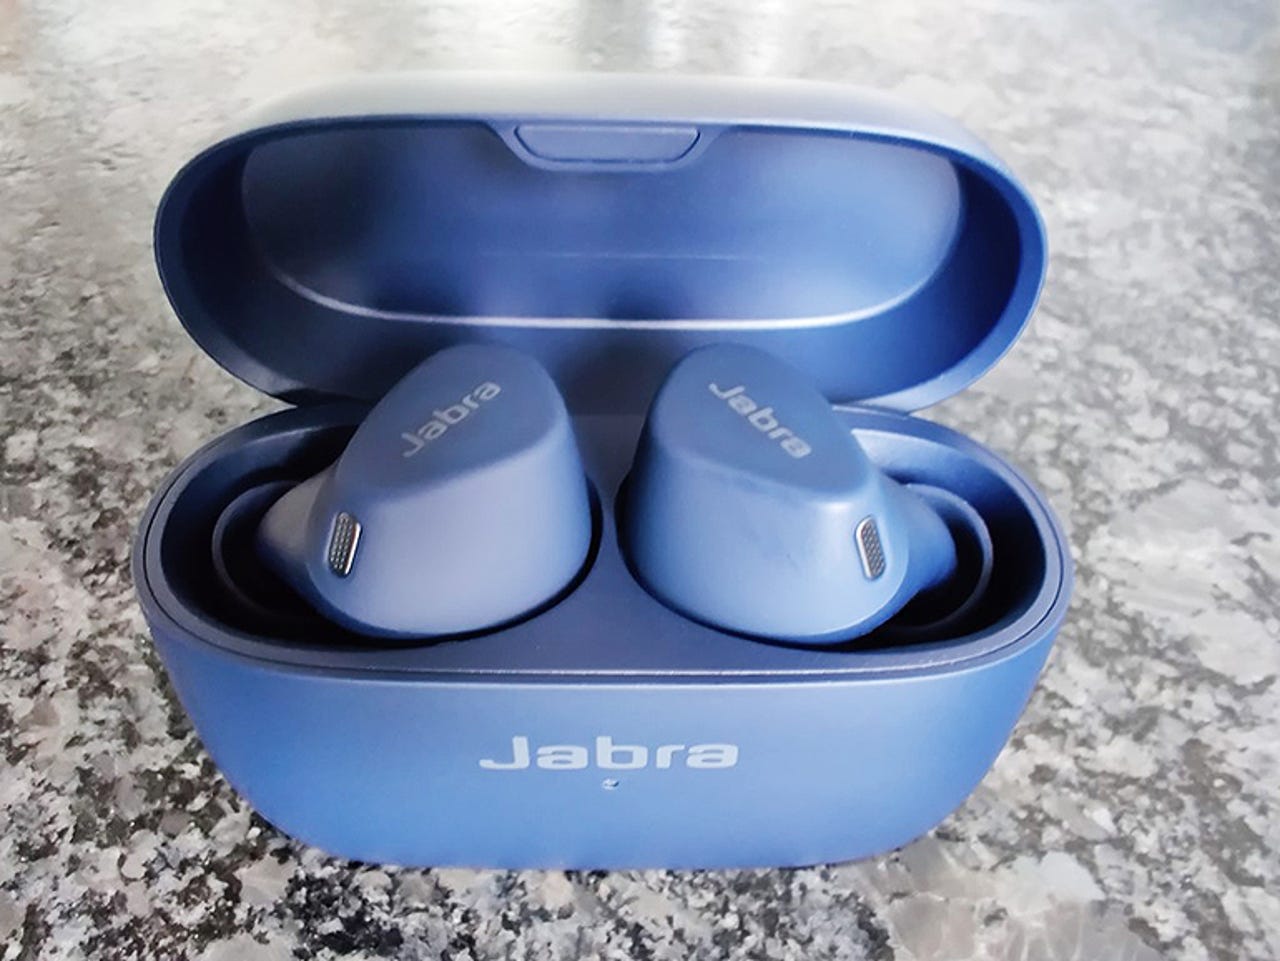 Jabra Elite 4 Active review: These workout earbuds offer a whole lot for  just $119